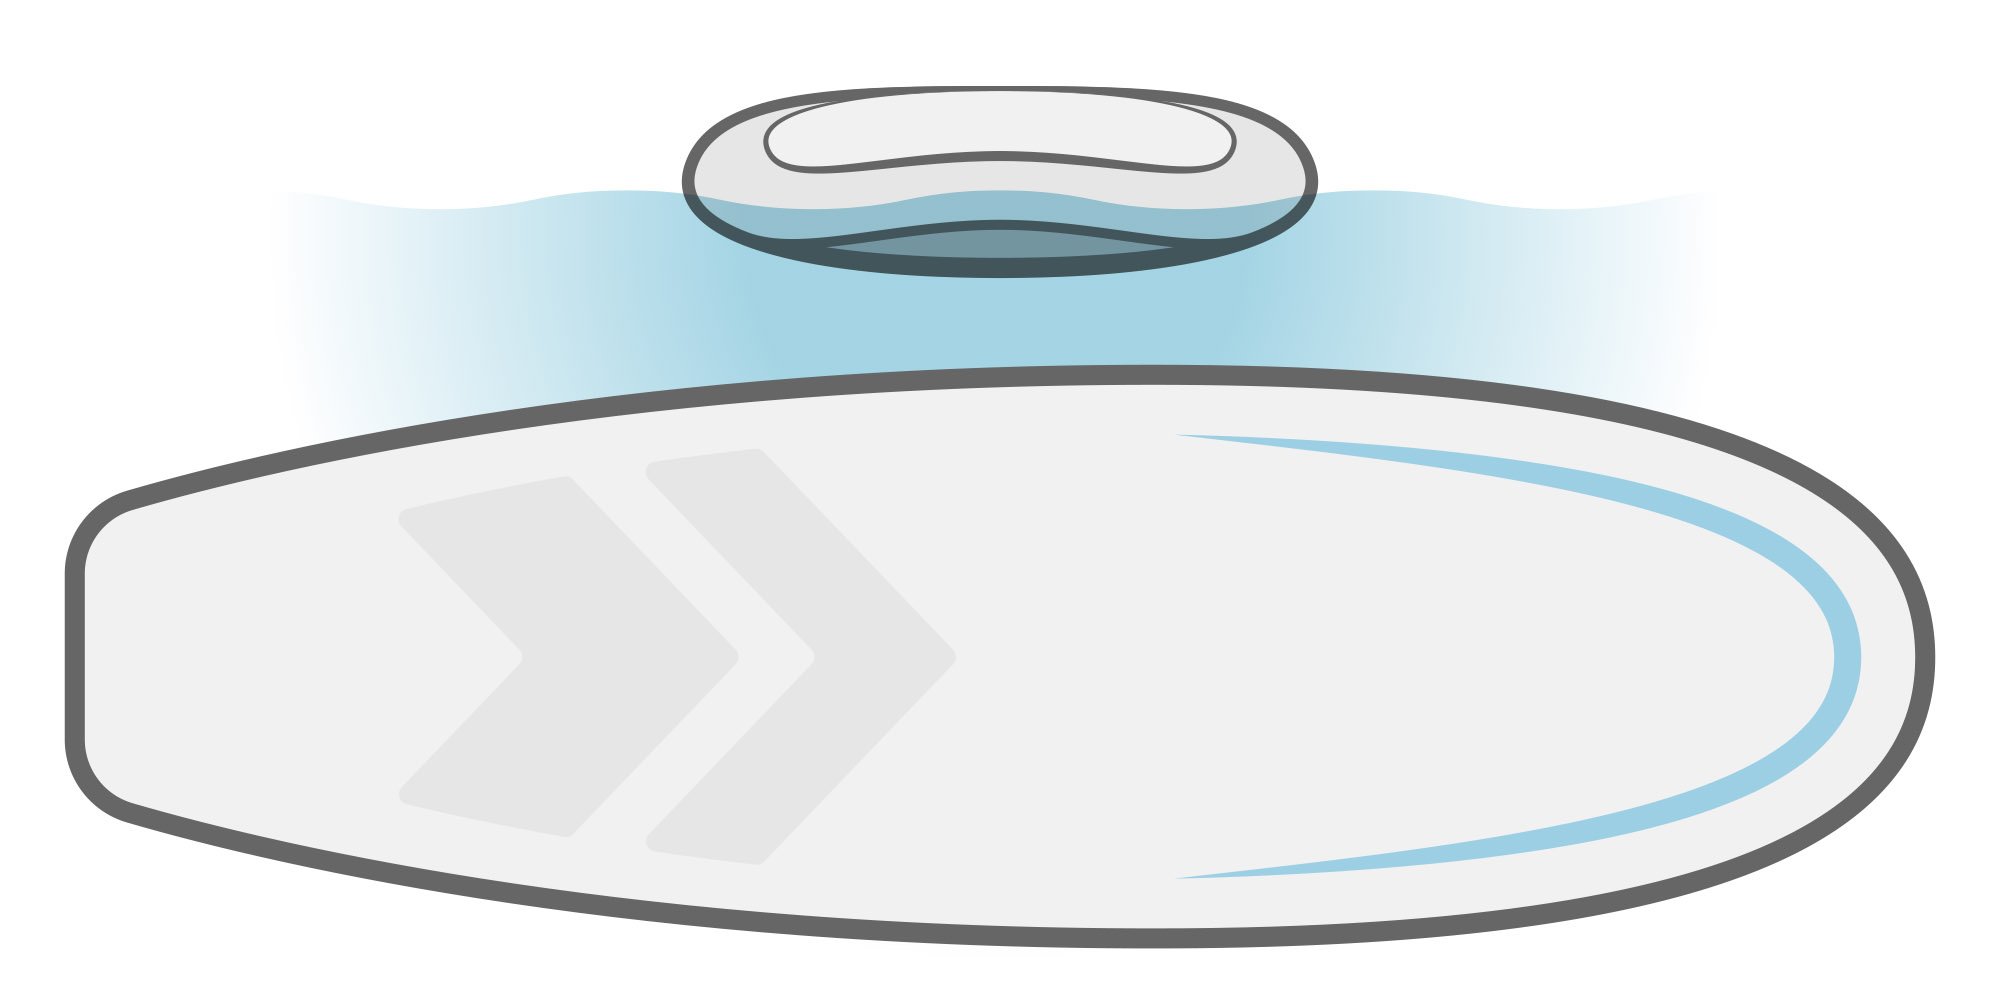 Illustration of SUP paddleboard with planing hull.